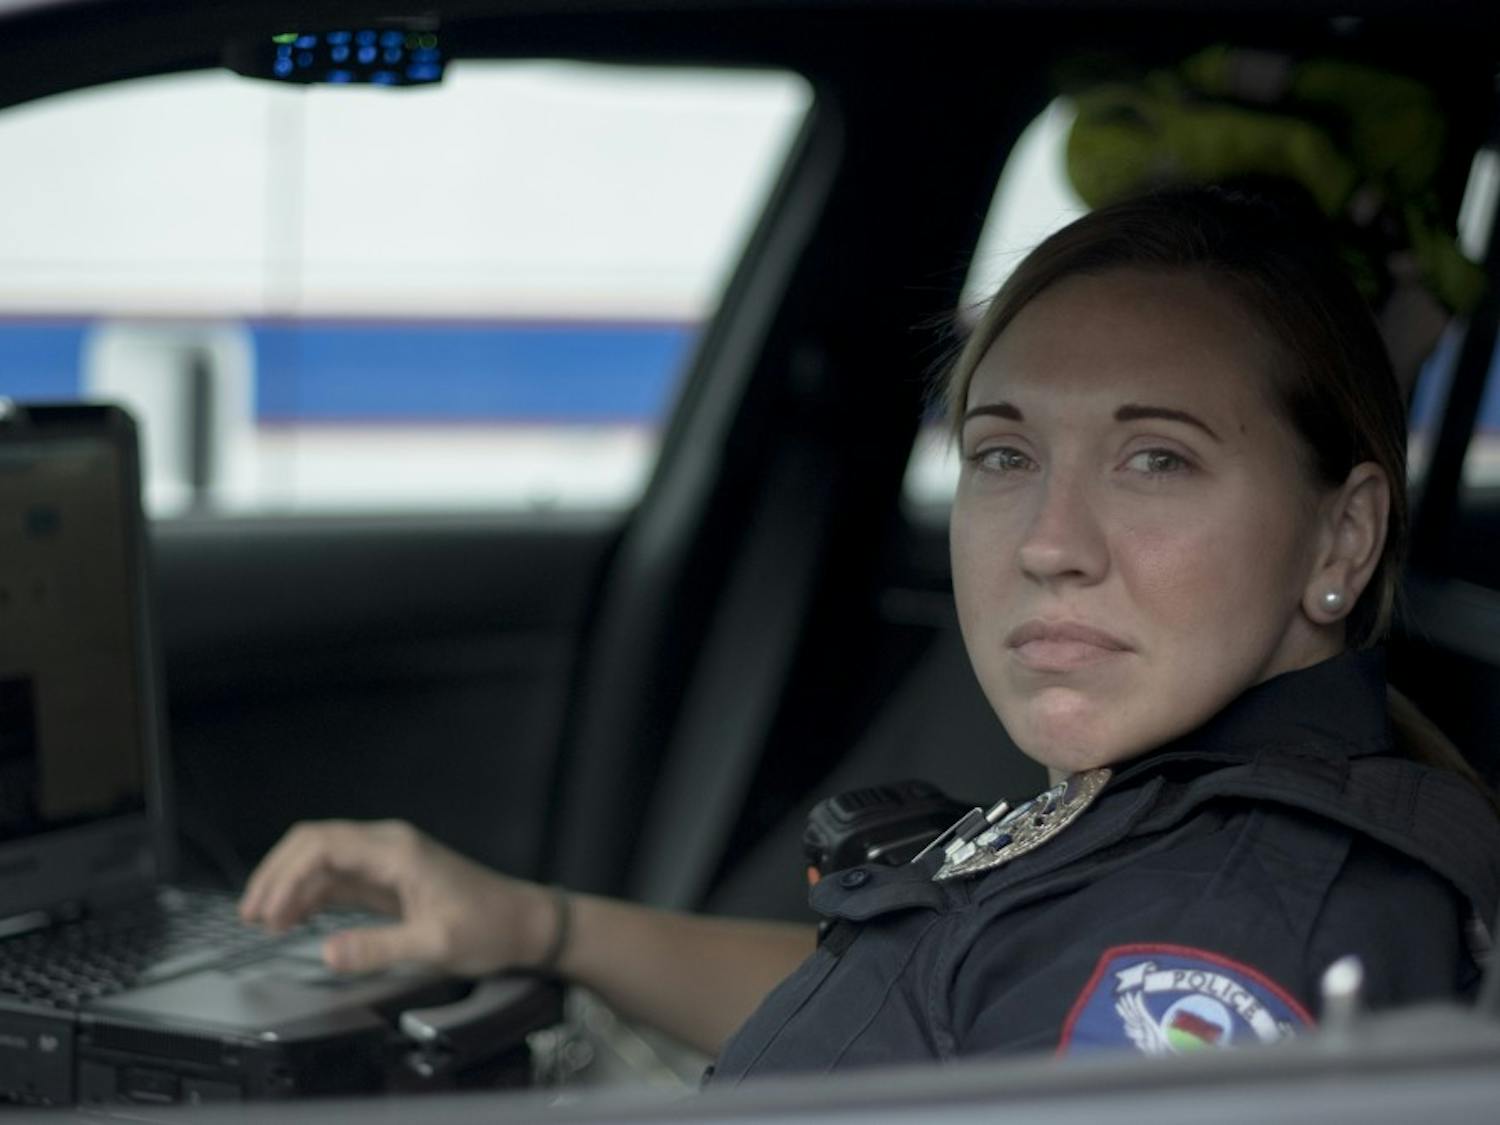 Officer Cox, a police officer working for Carrboro NC, took a moment to reflect on the recent vehicle thefts in the Carrboro area on Sunday, Oct. 6, 2019. She mentioned that it’s an issue that could be avoided if people would lock their car doors.&nbsp;